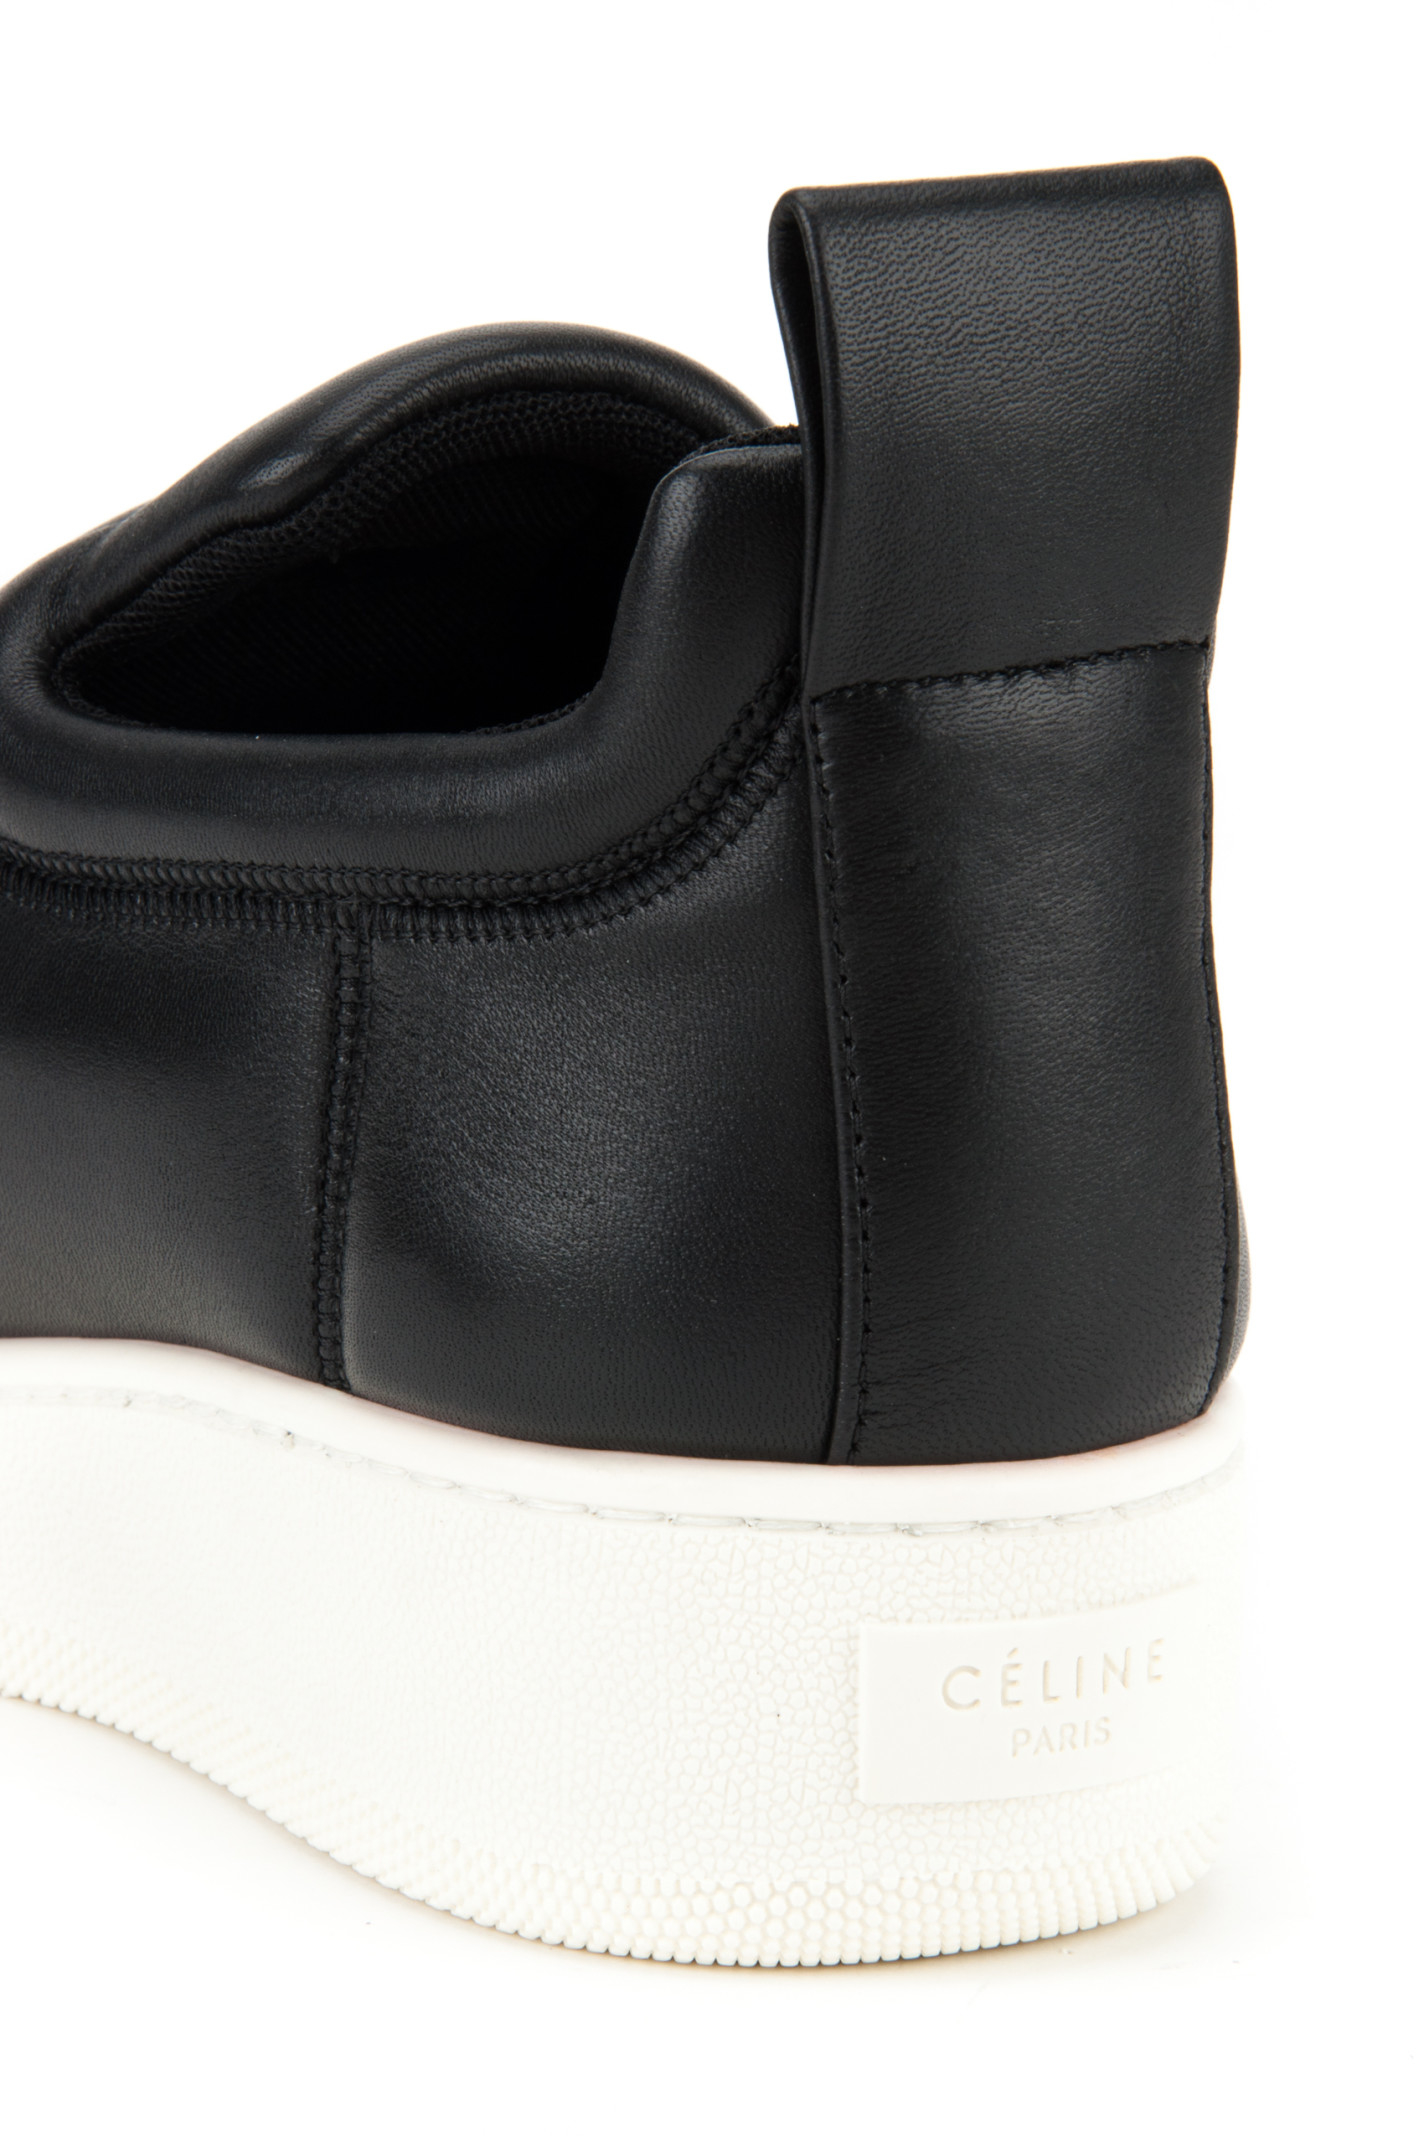 Celine Pull On Stretch Nappa Sneakers in Black | Lyst